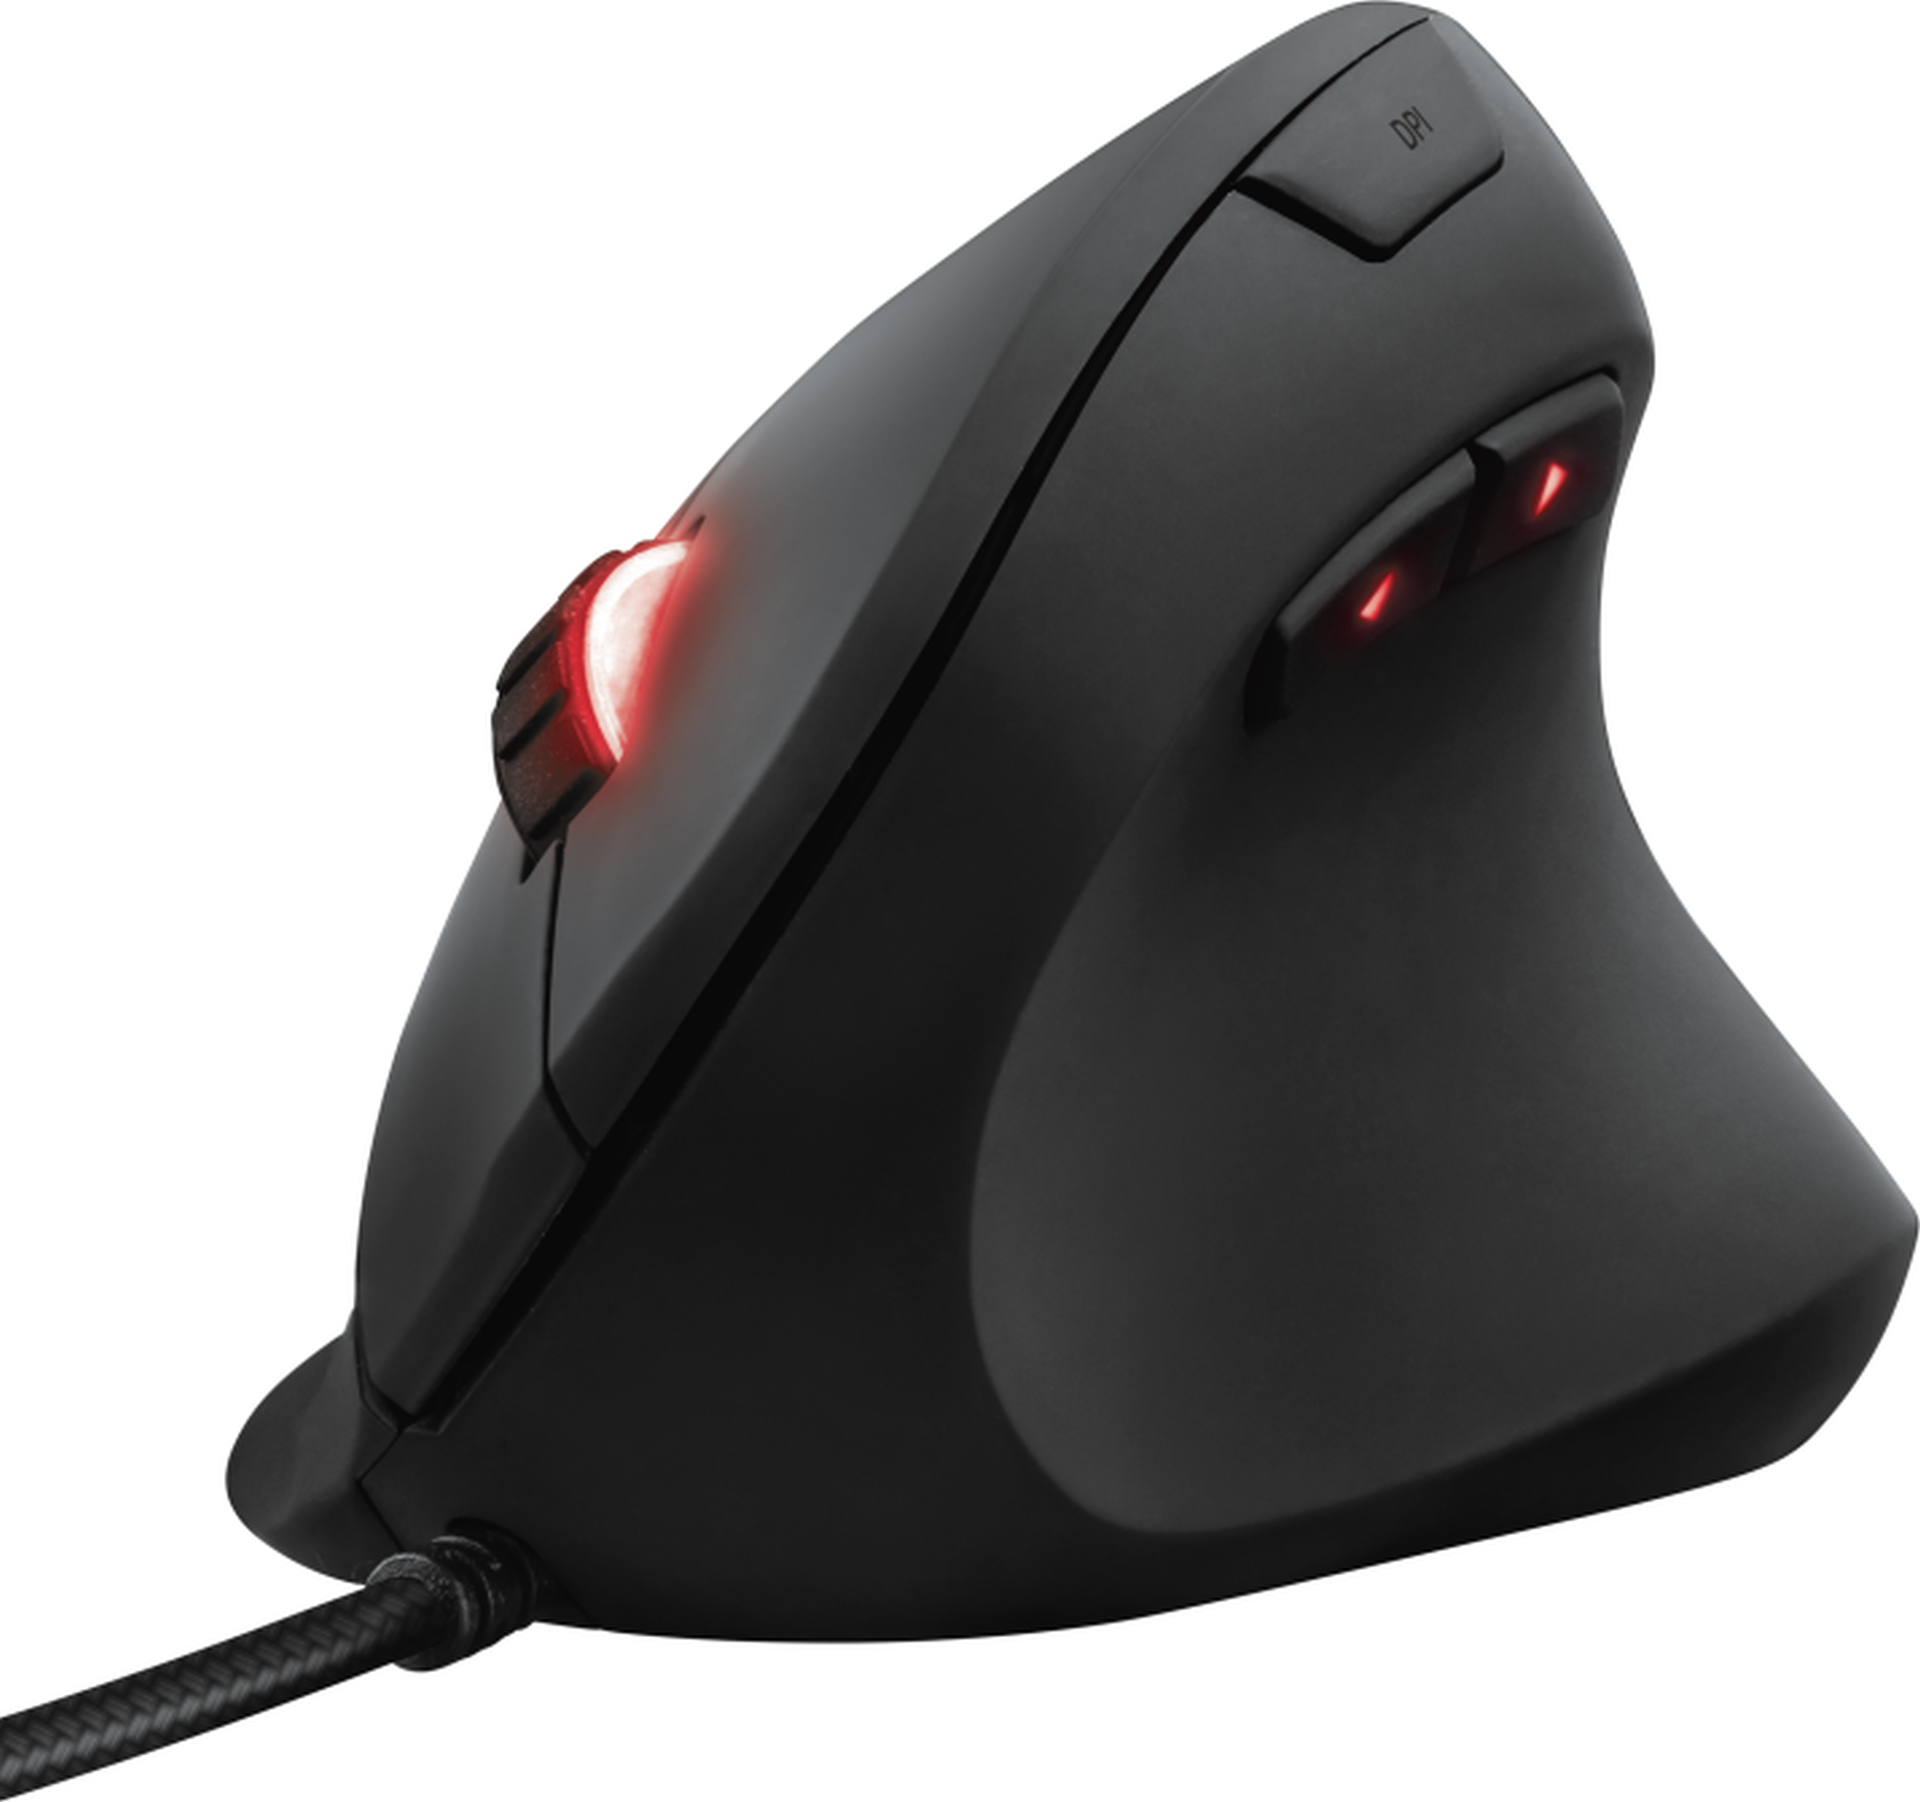 8713439229912 TRUST GXT144 REXX ERGO MOUSE - Ergonomisk gaming mus Computer & IT,Gaming,Gaming mus 18900004260 22991